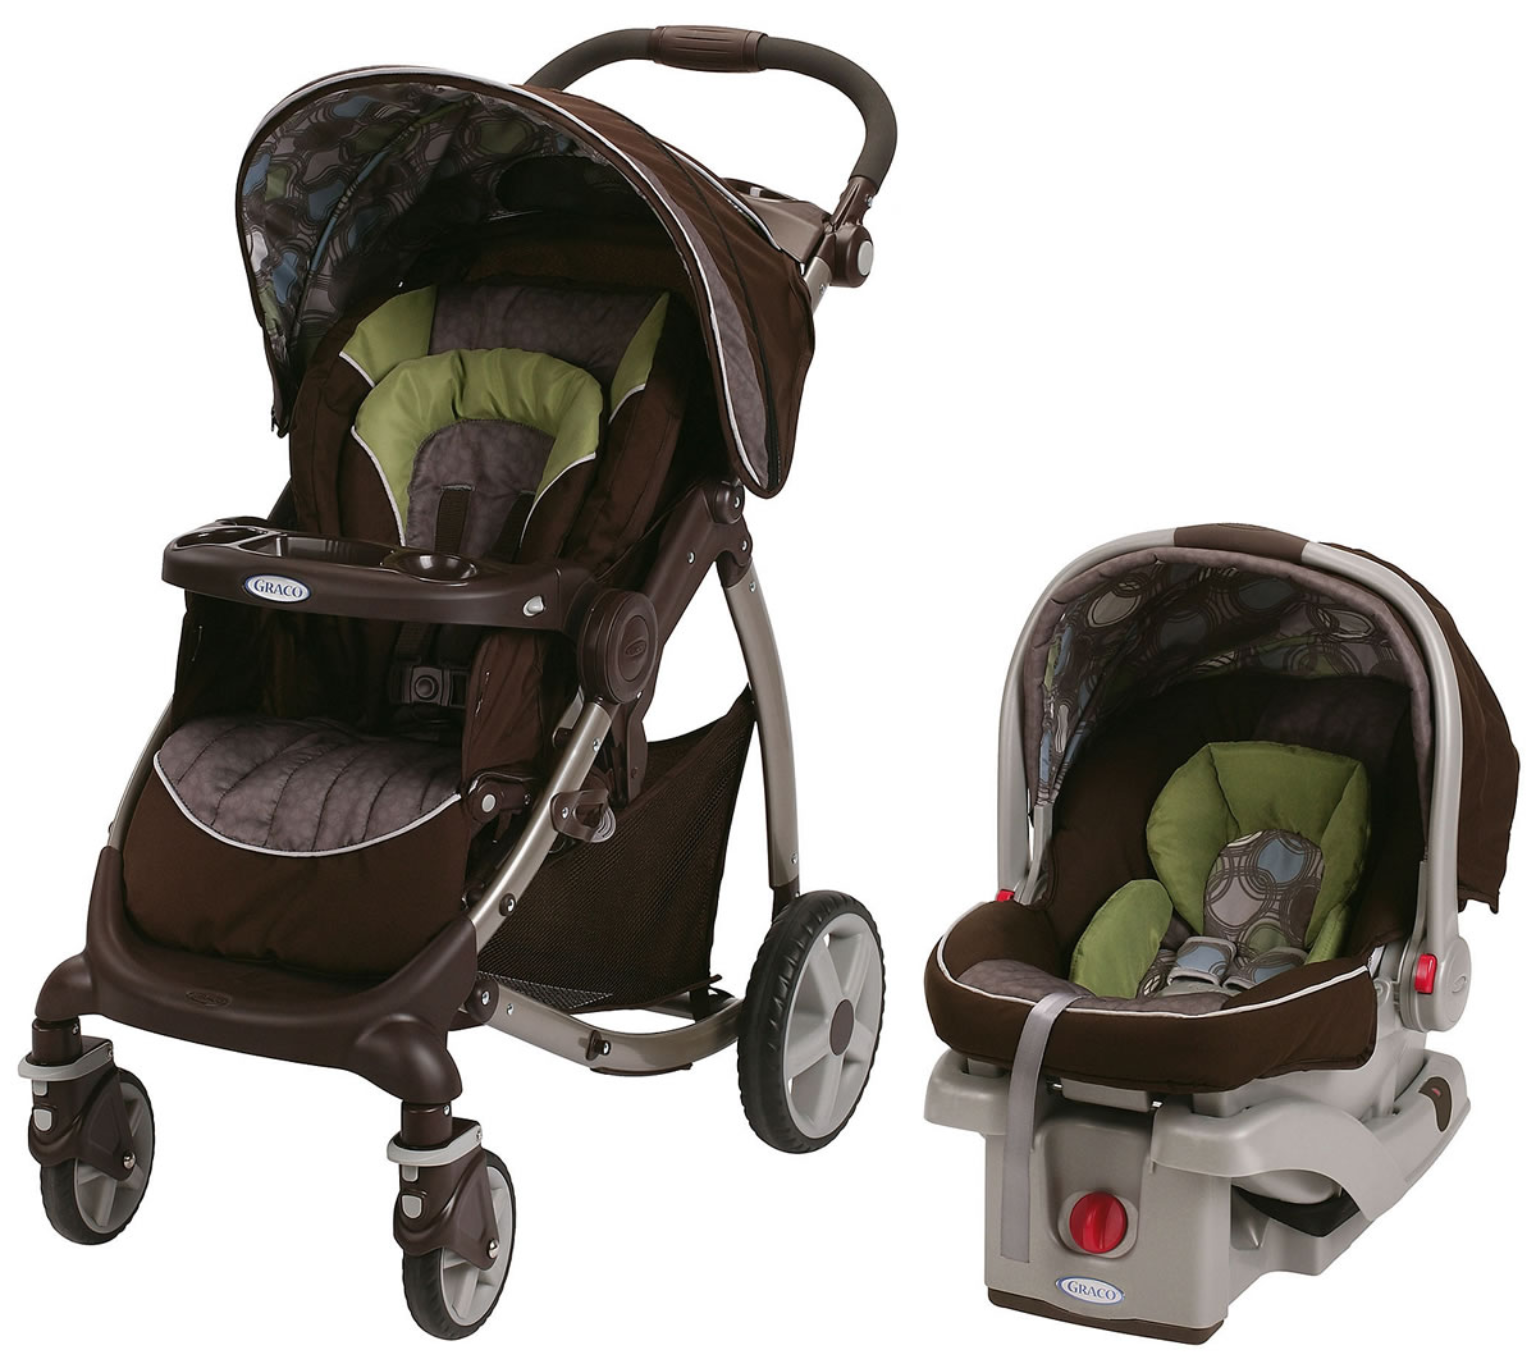 Graco stylus snugride infant stroller with car seat (pick up only)